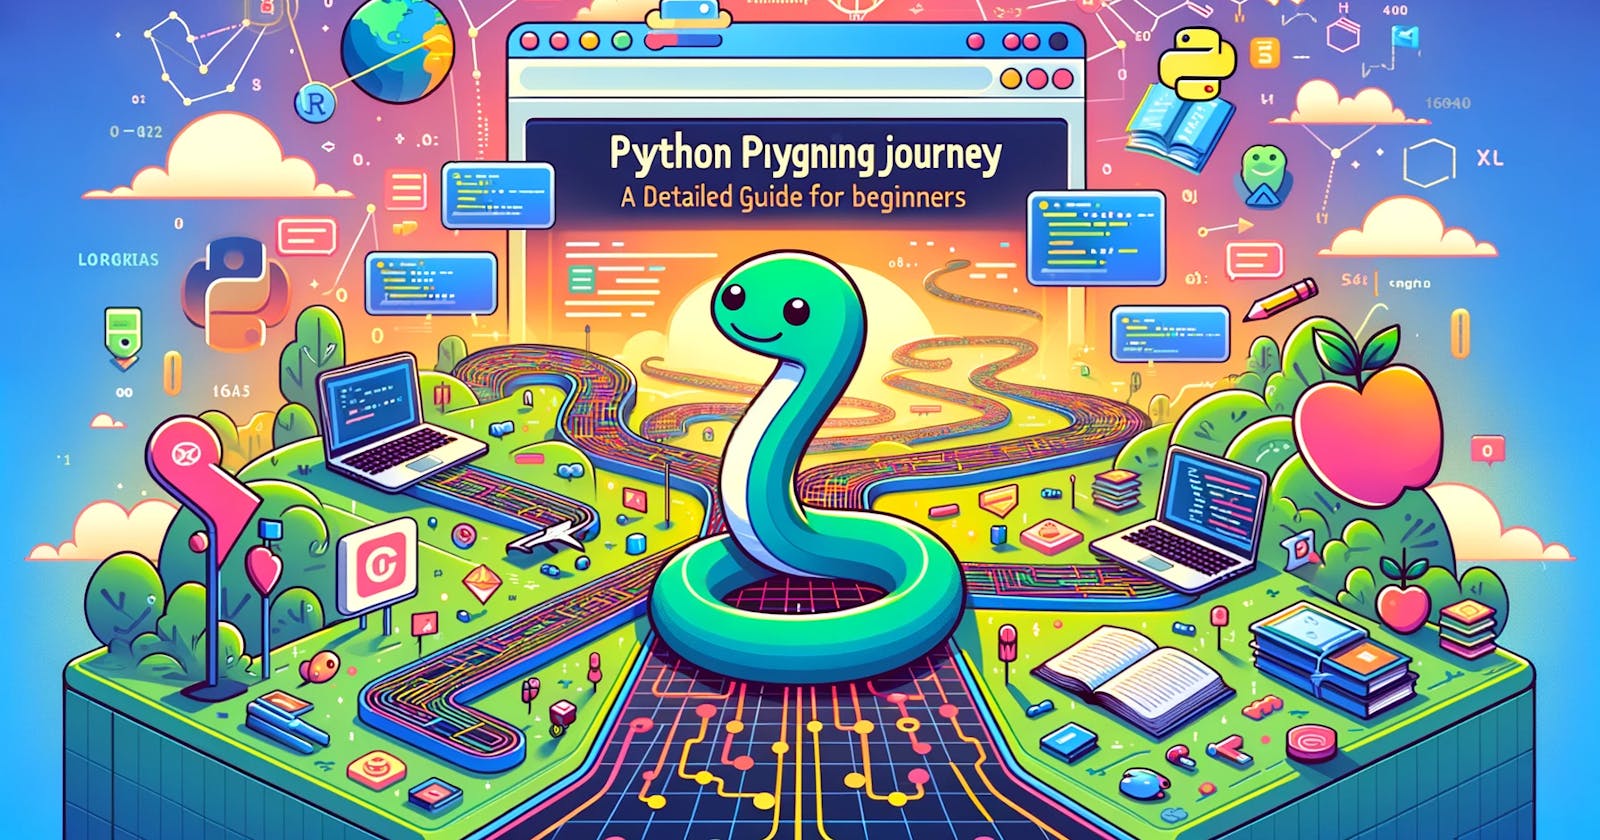 Python: A Step-by-Step Guide for Beginners